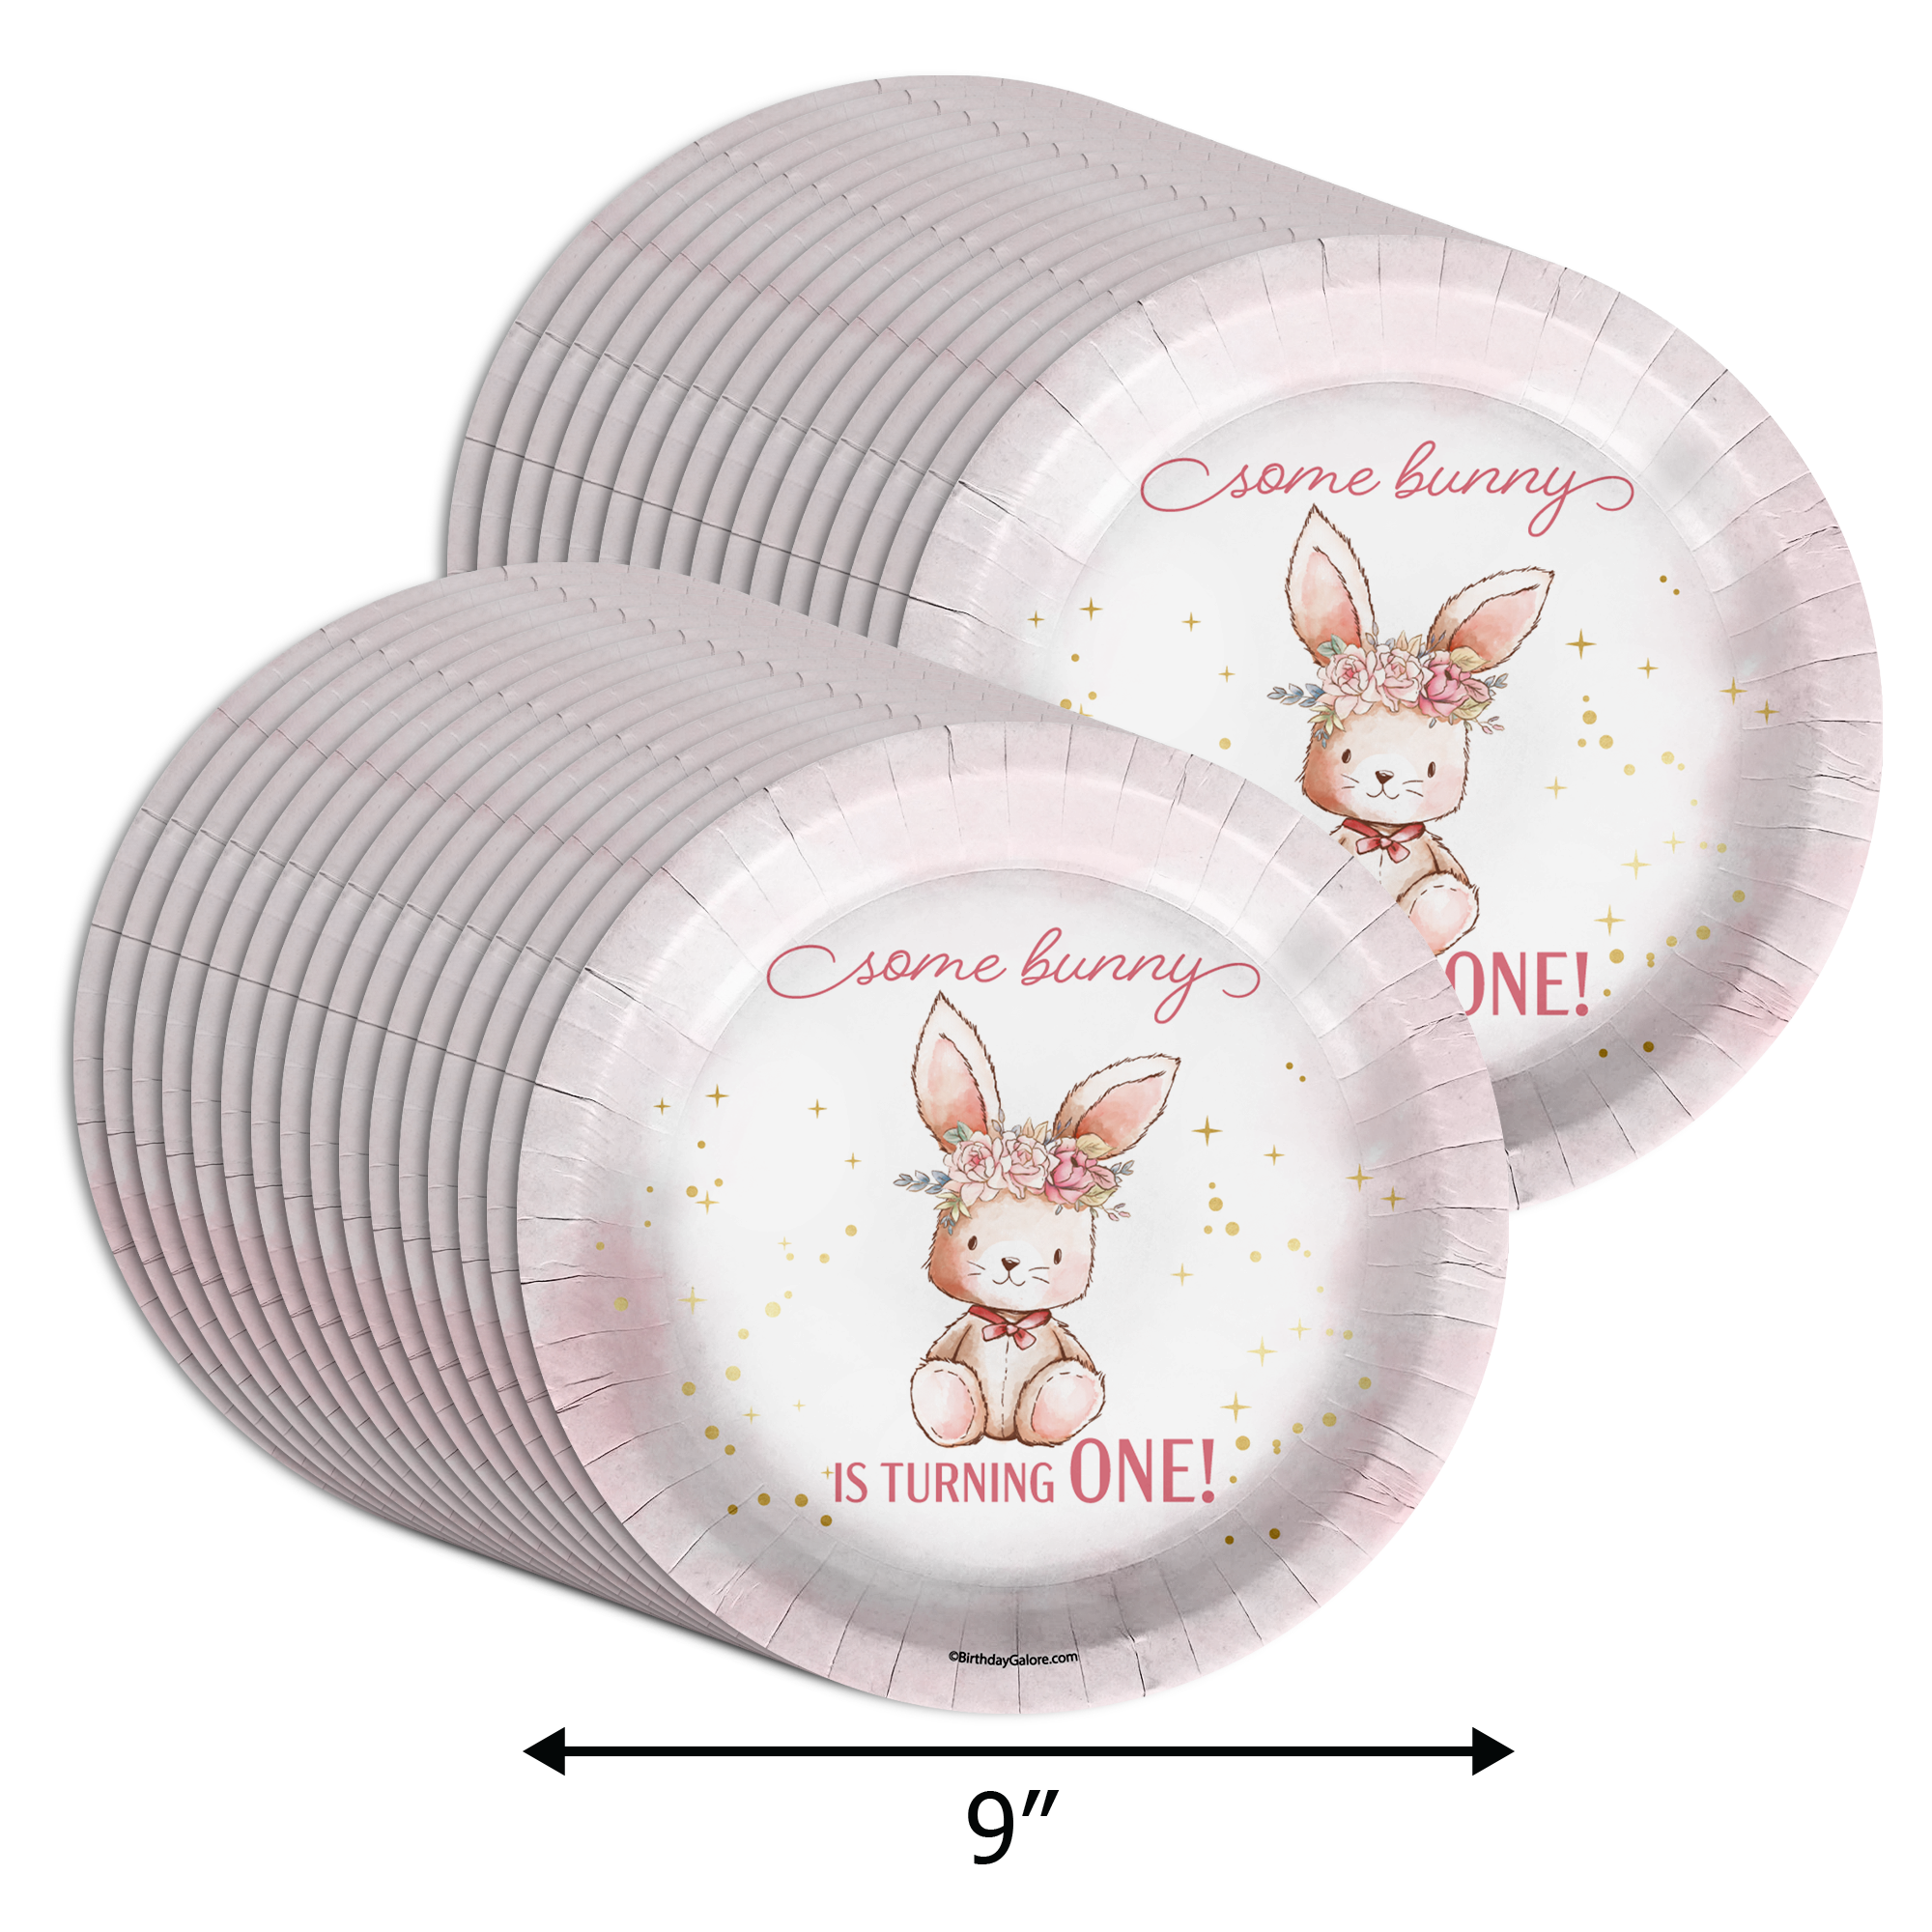 Some Bunny is Turning One First Birthday Party Supplies Large 9" Paper Plates in Bulk 32 Piece